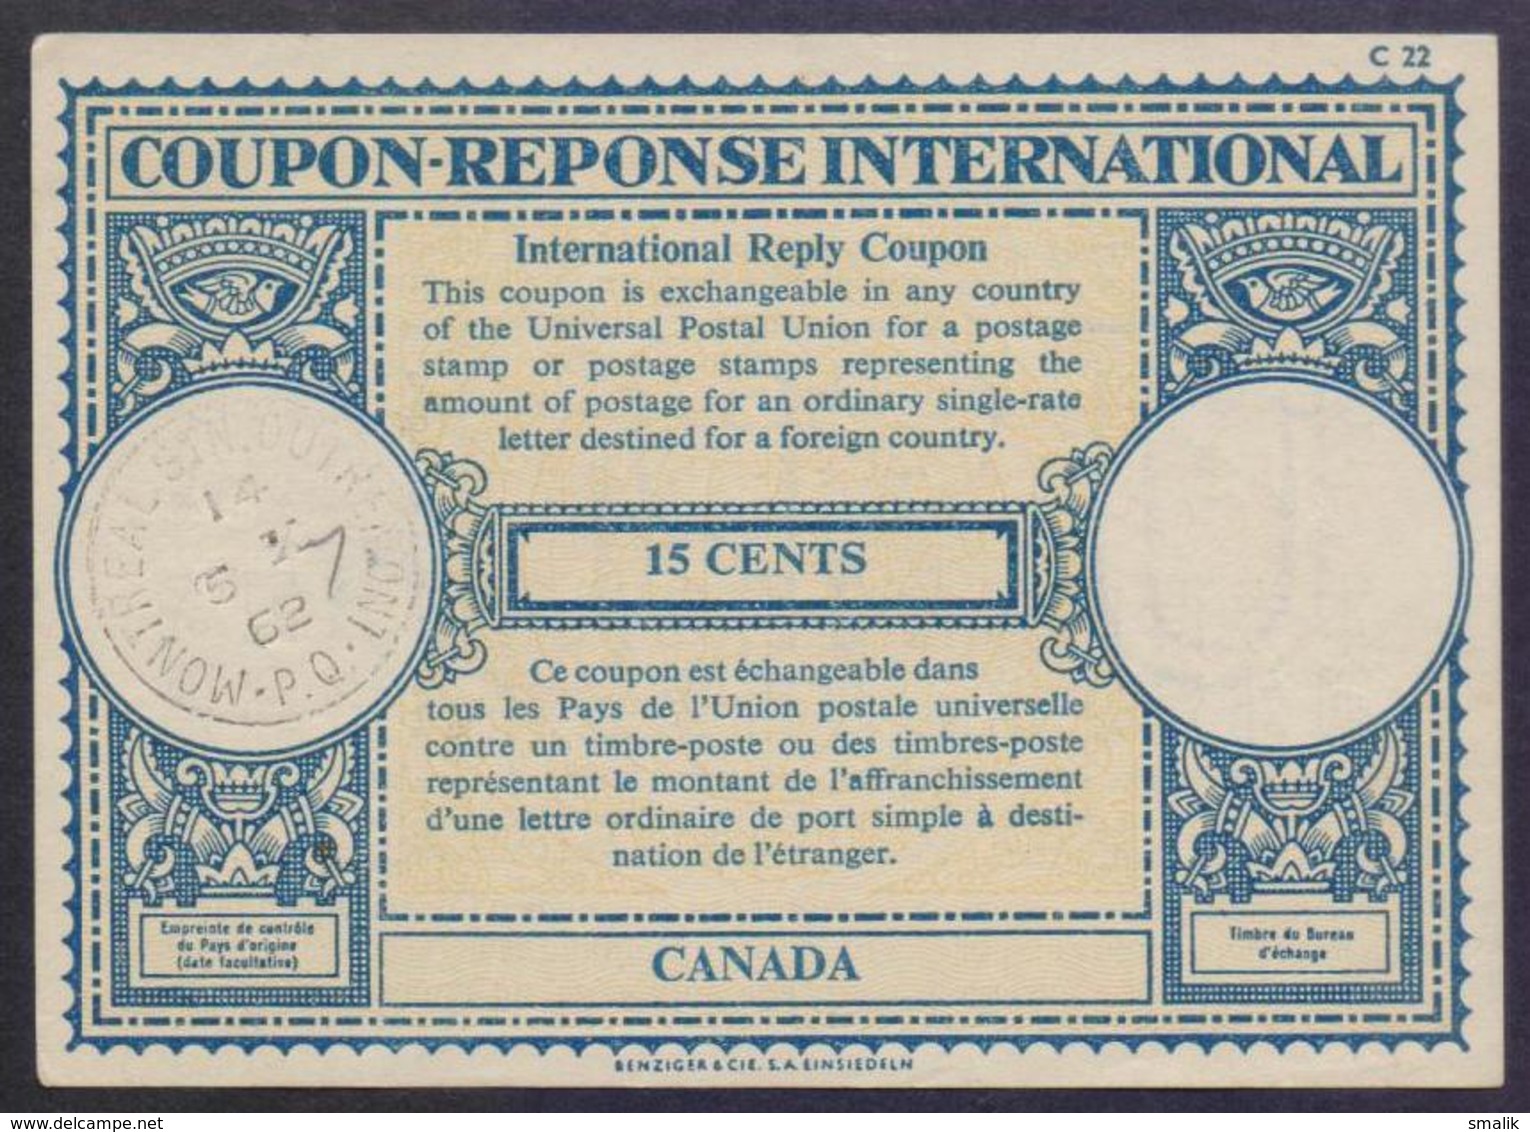 CANADA - 15 Cents London Type IRC COUPON REPONSE INTERNATIONAL REPLY, UPU, Cancelled 5.10. 1962 - Reply Coupons